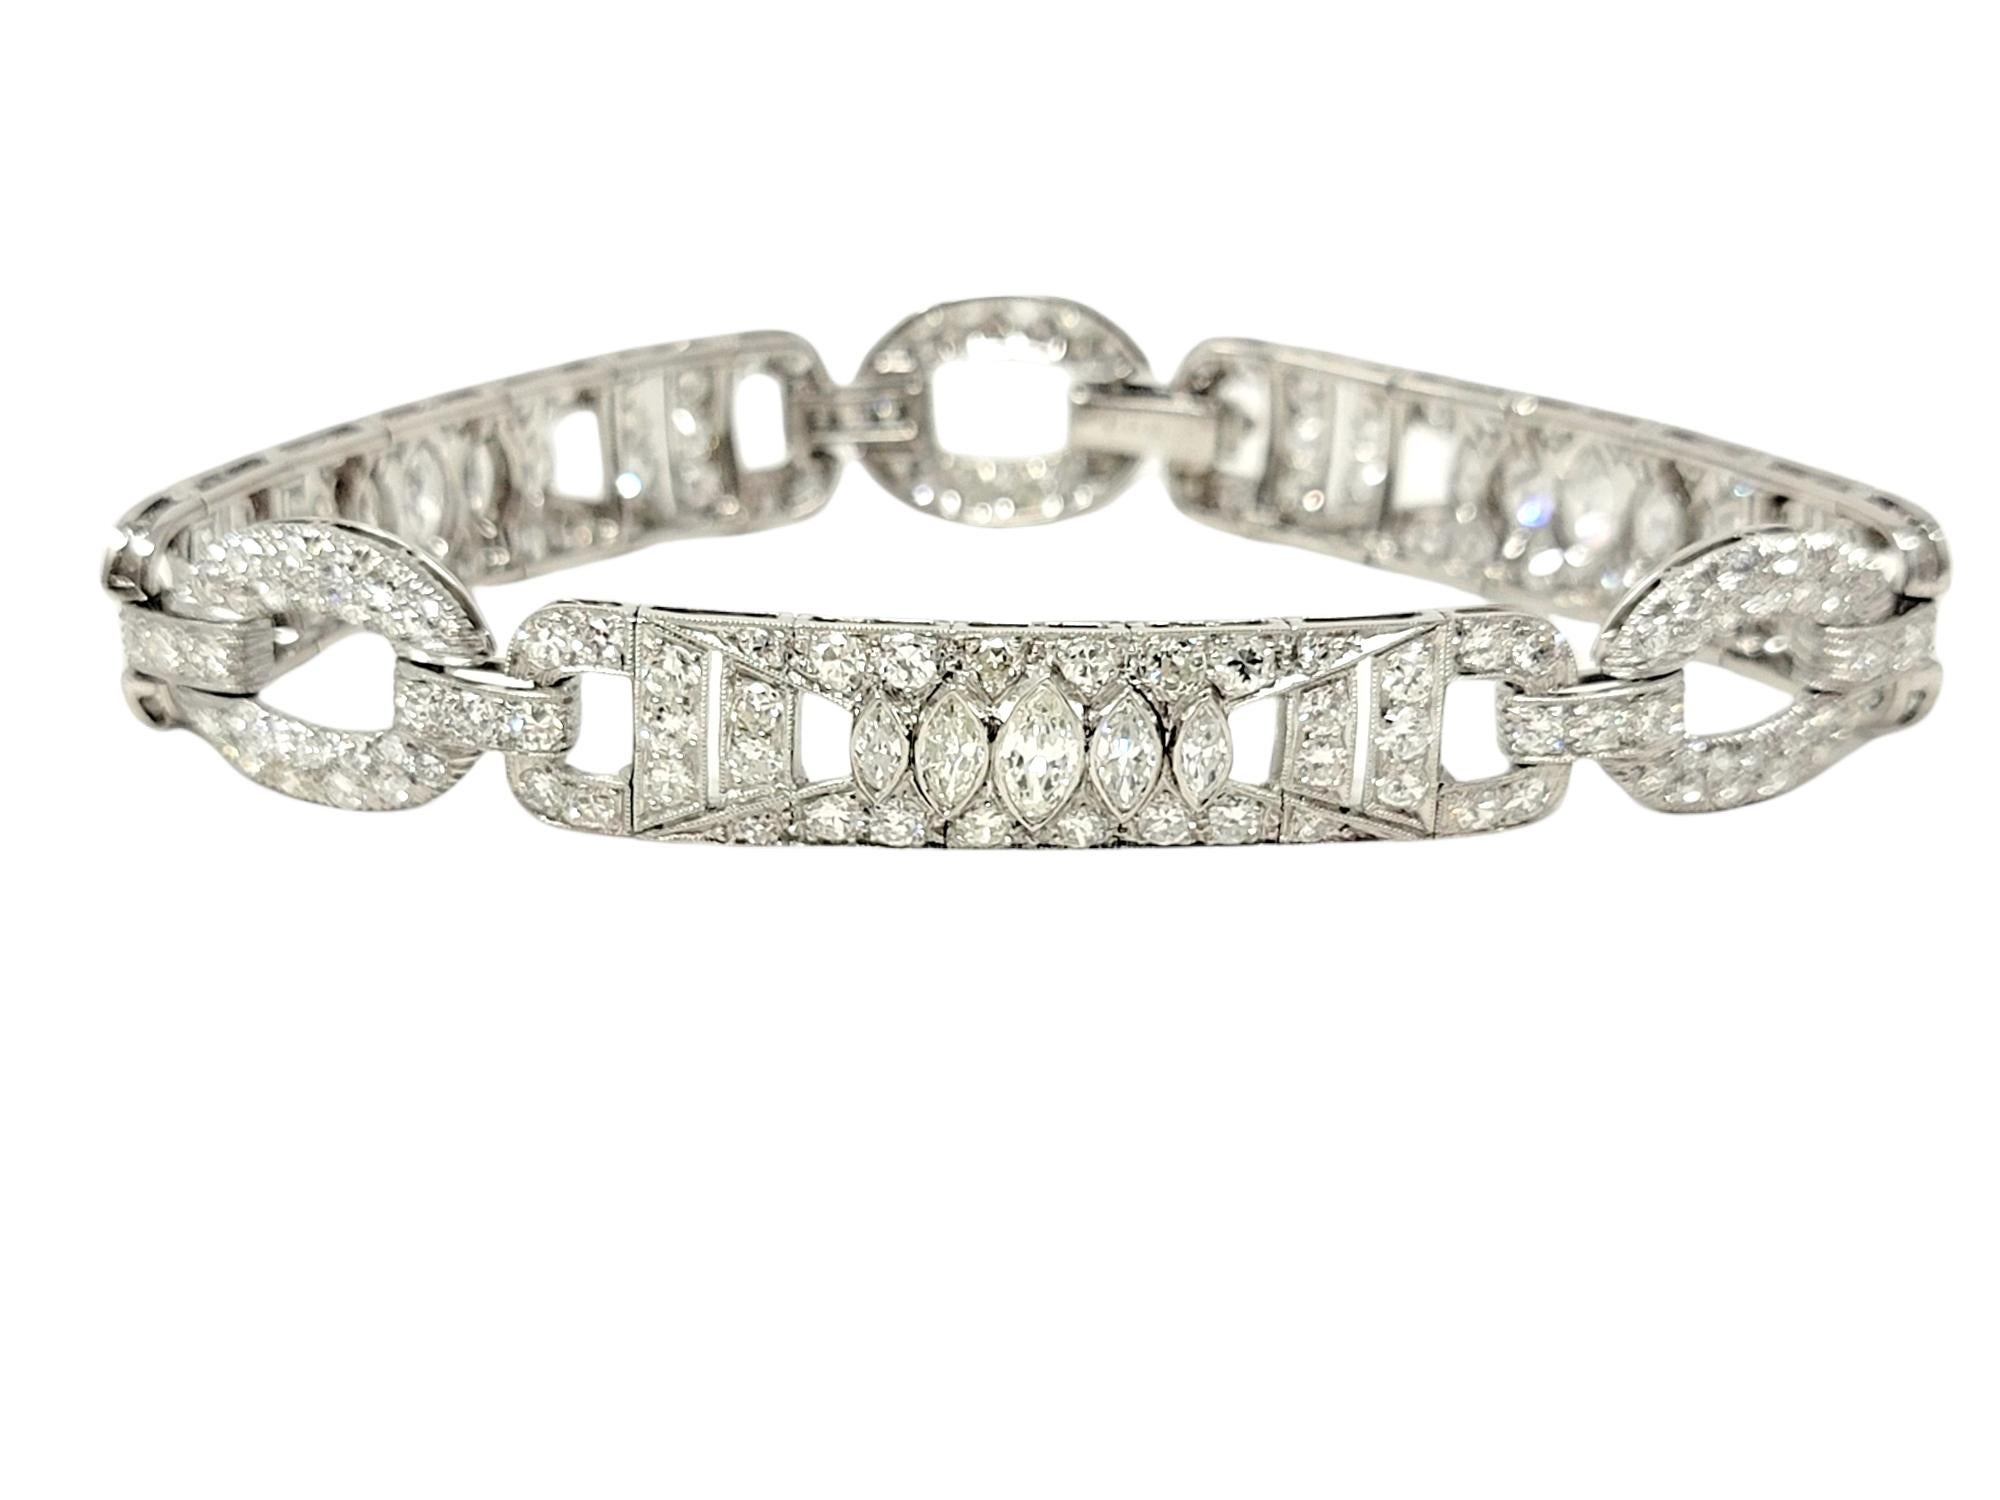 This absolutely stunning diamond and platinum bracelet exudes elegance and glamour, with a touch of Old World sophistication. This unique piece features assorted shaped open platinum links with ornate milgrain detailing throughout. The polished